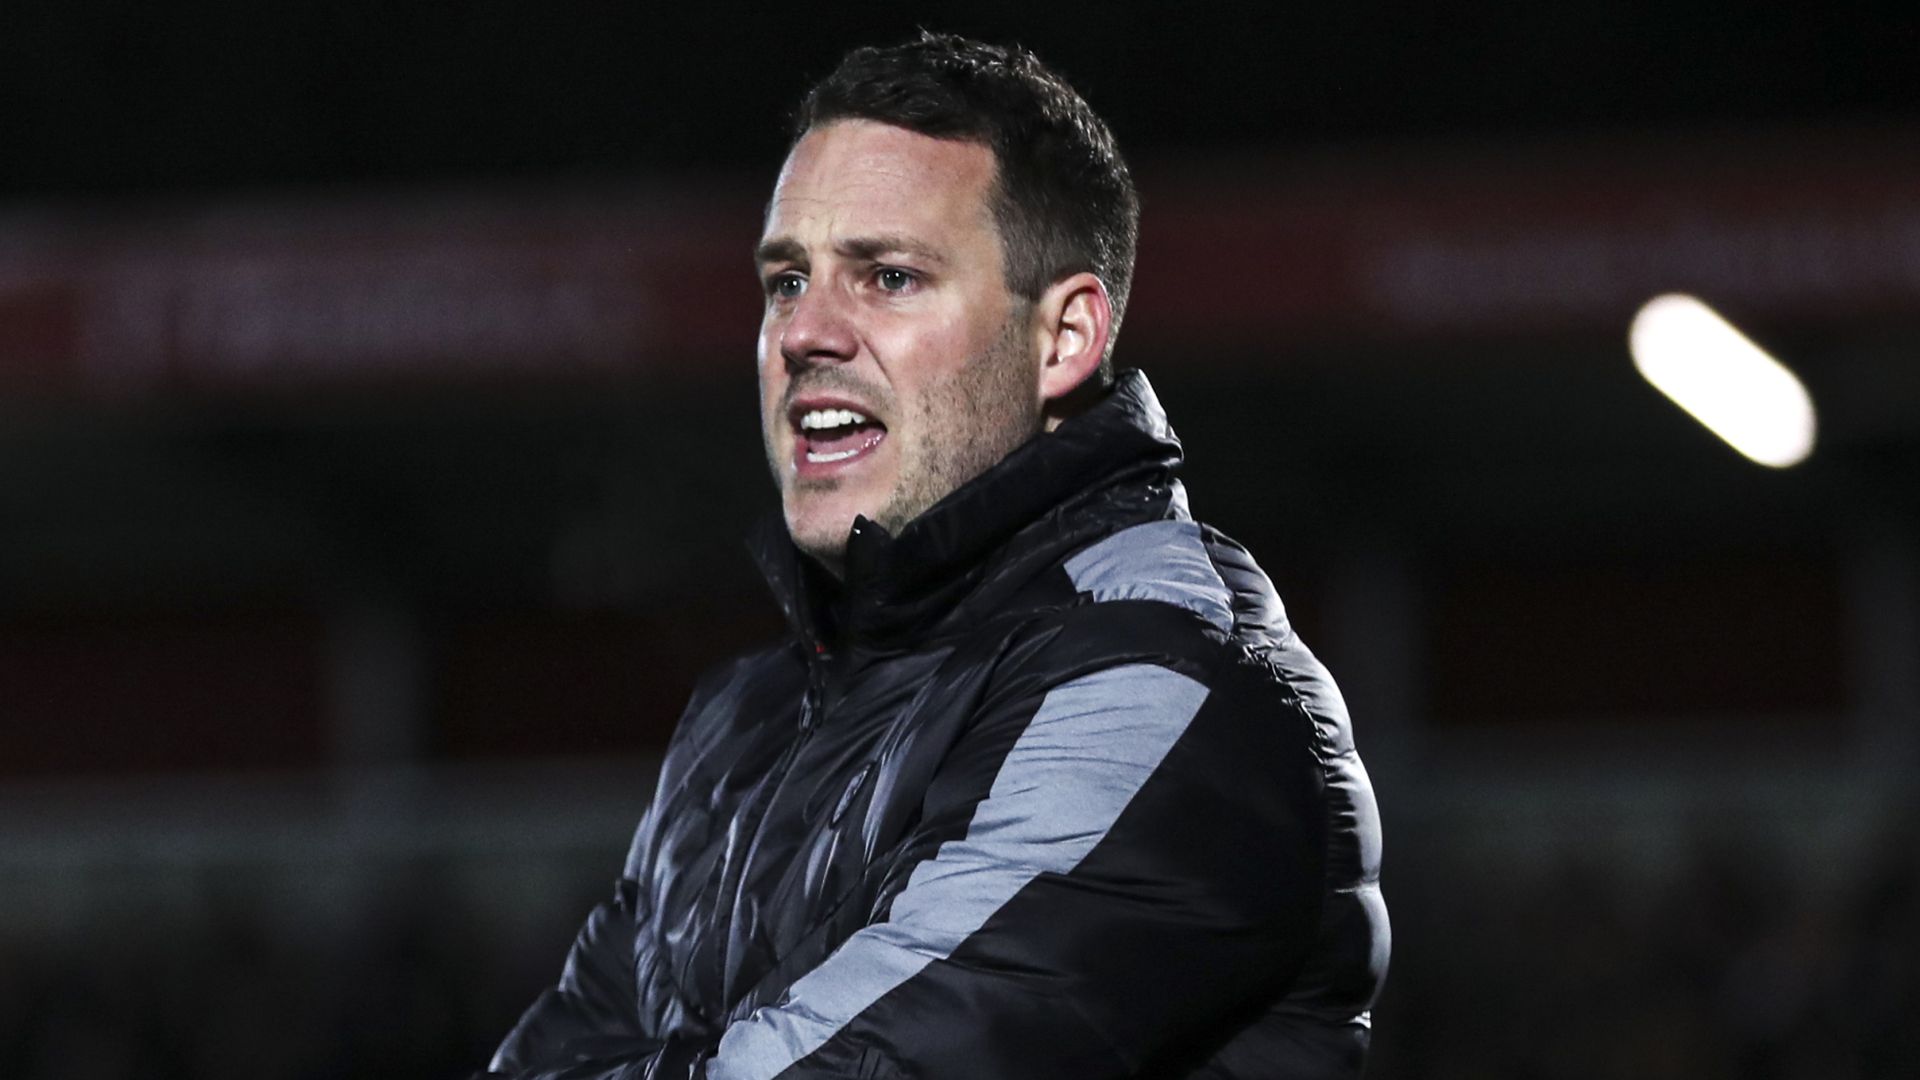 AFC Fylde manager Rowe charged with sexual assault